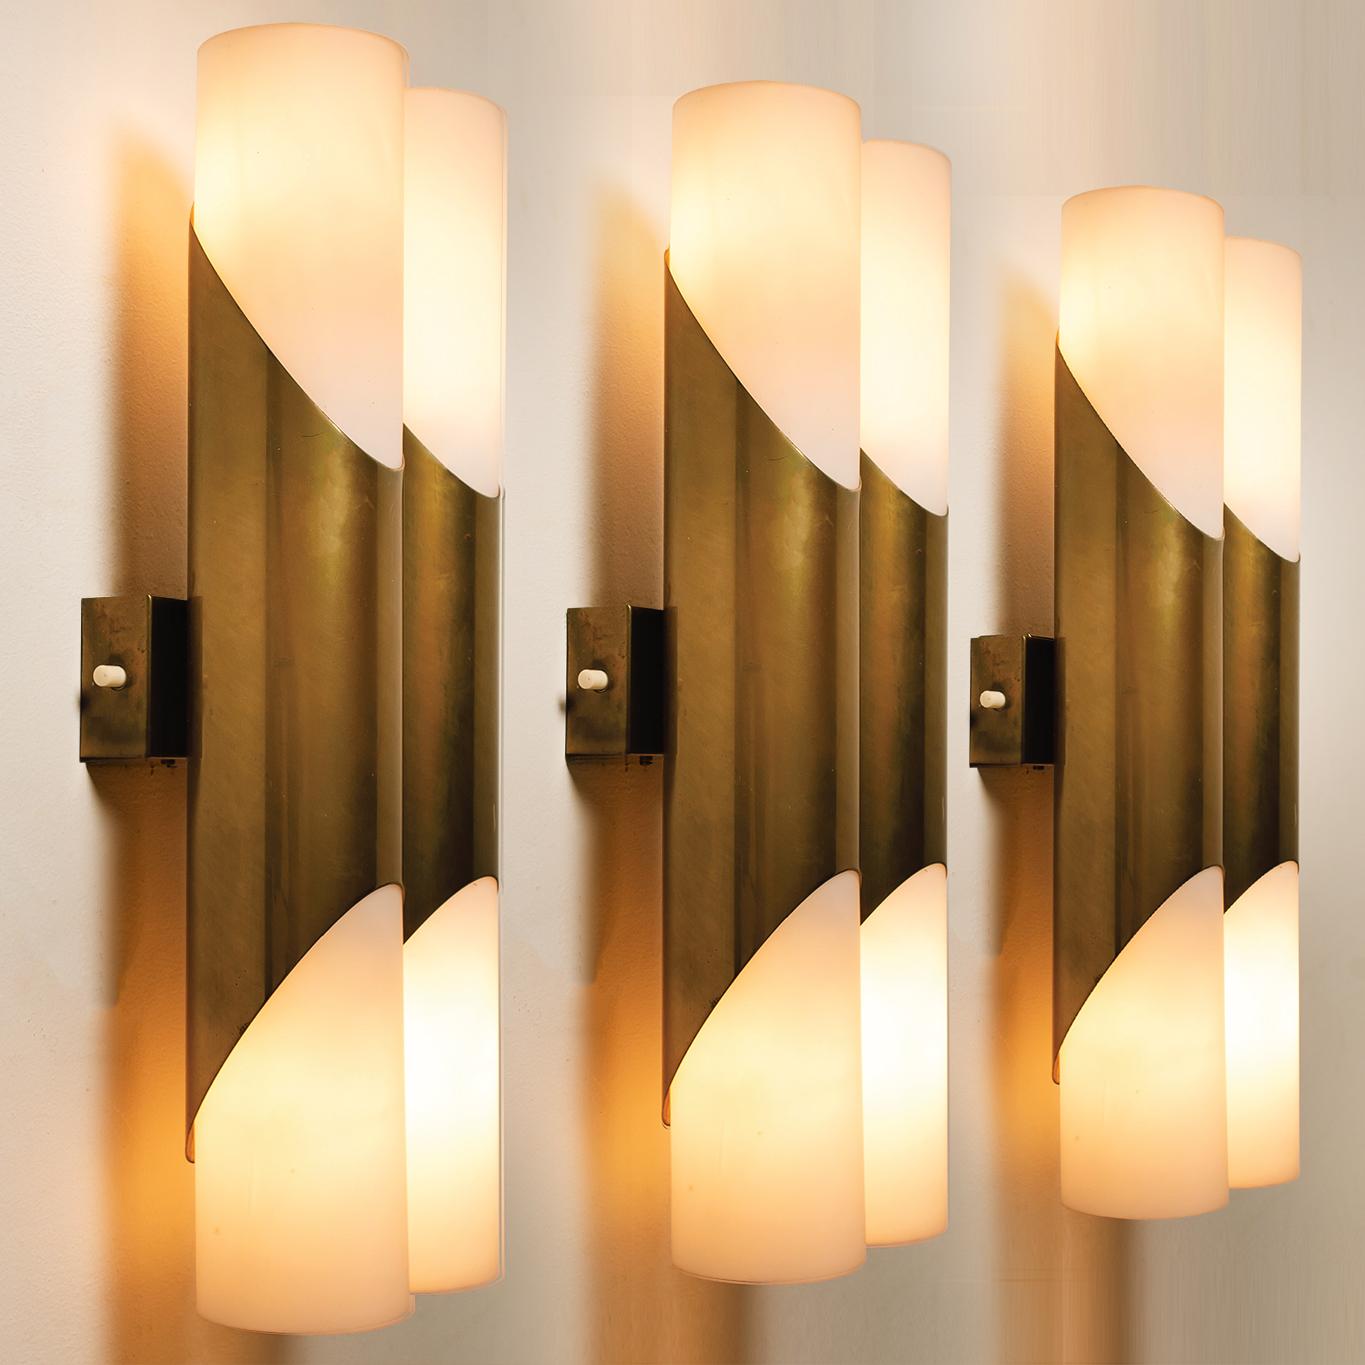 Late 20th Century Four Wall Sconces or Wall Lights in the Style of RAAK Amsterdam, 1970 For Sale